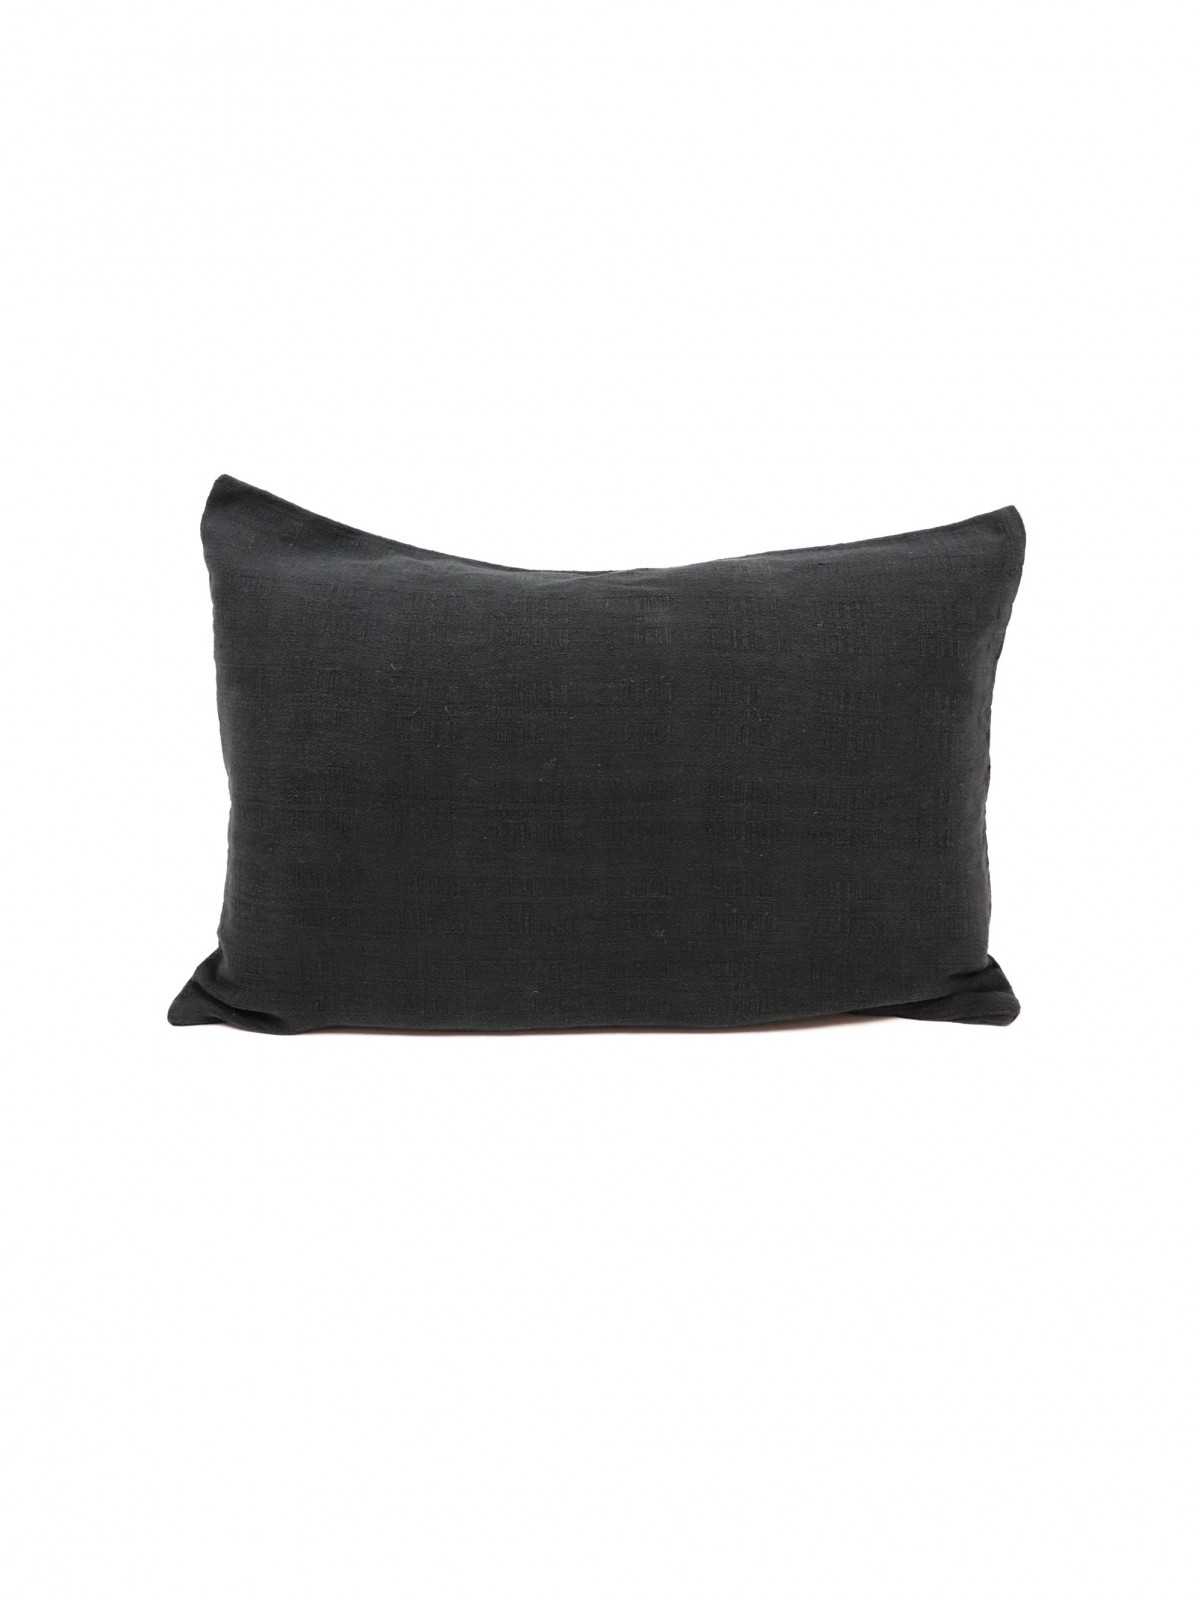 Black dyed linen fabric,French linen Cushion,Brown's remake